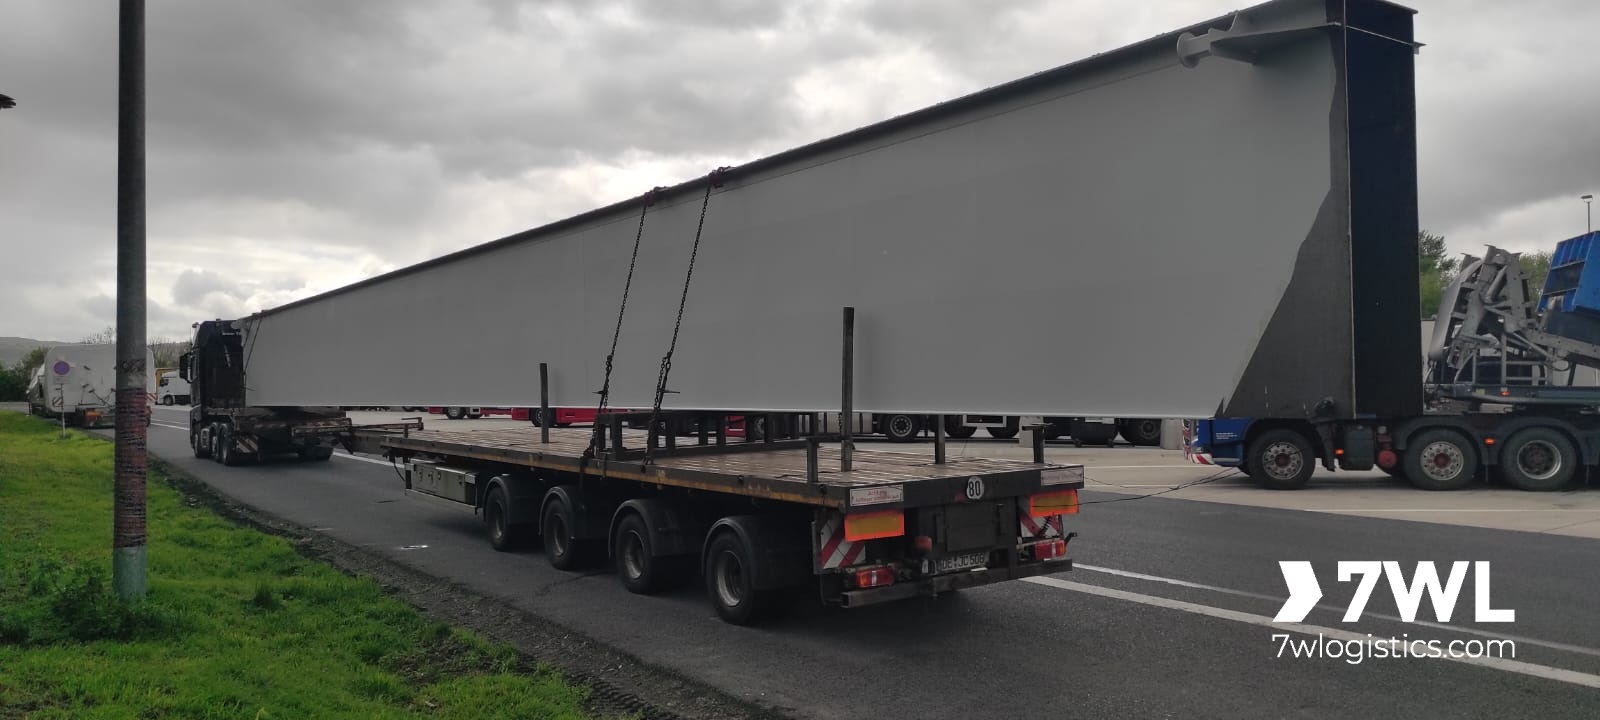 Crane girder moves within Germany